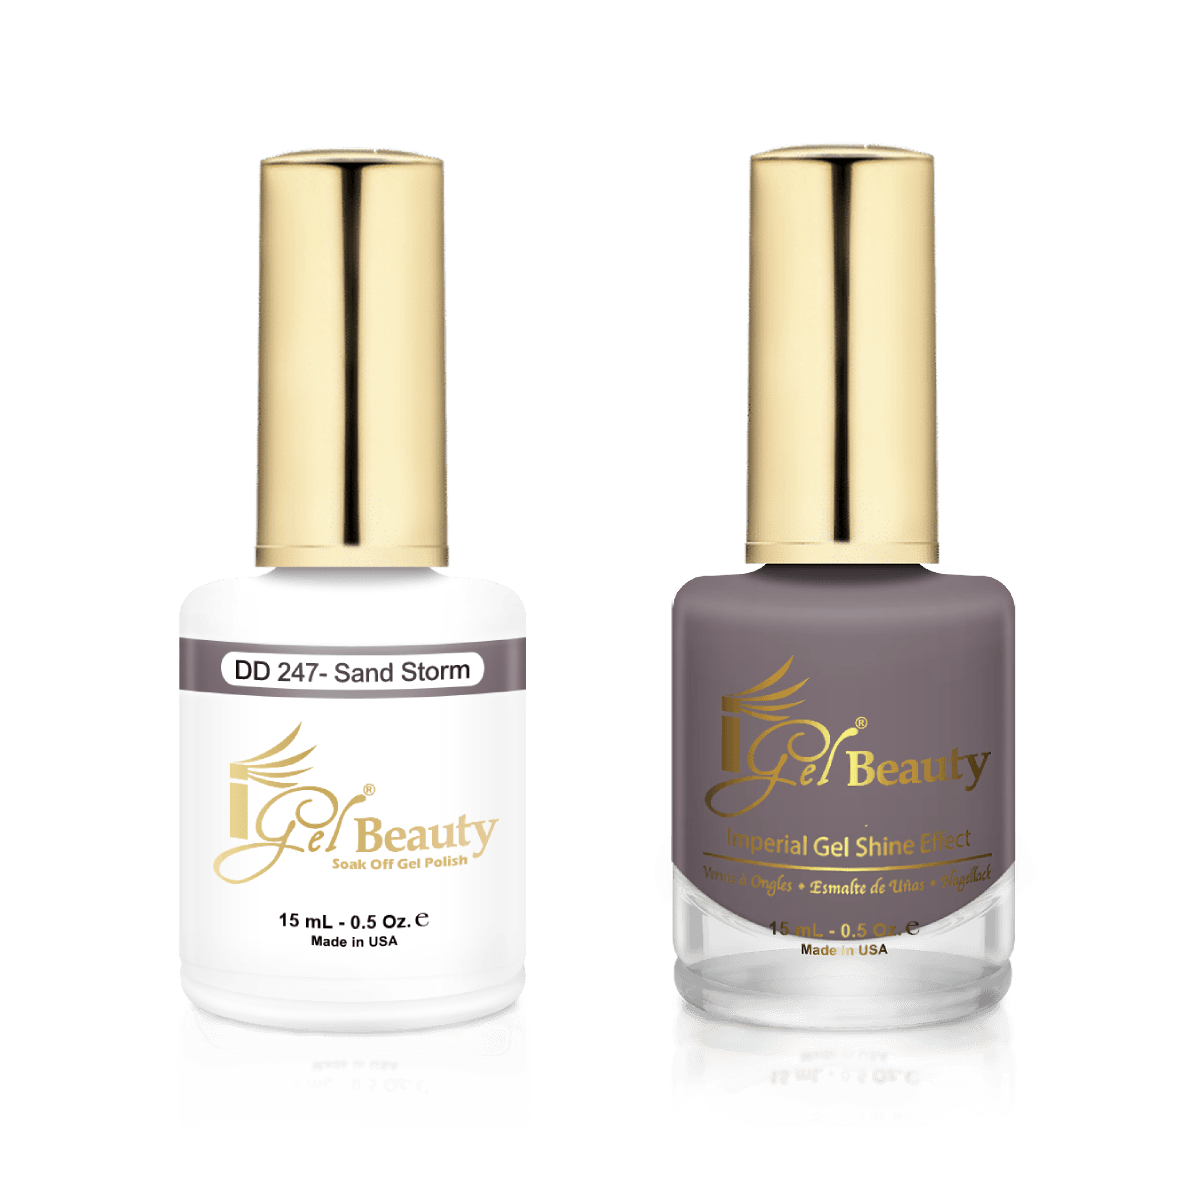 IGel Duo Gel Polish + Matching Nail Lacquer DD 247 SAND STORM